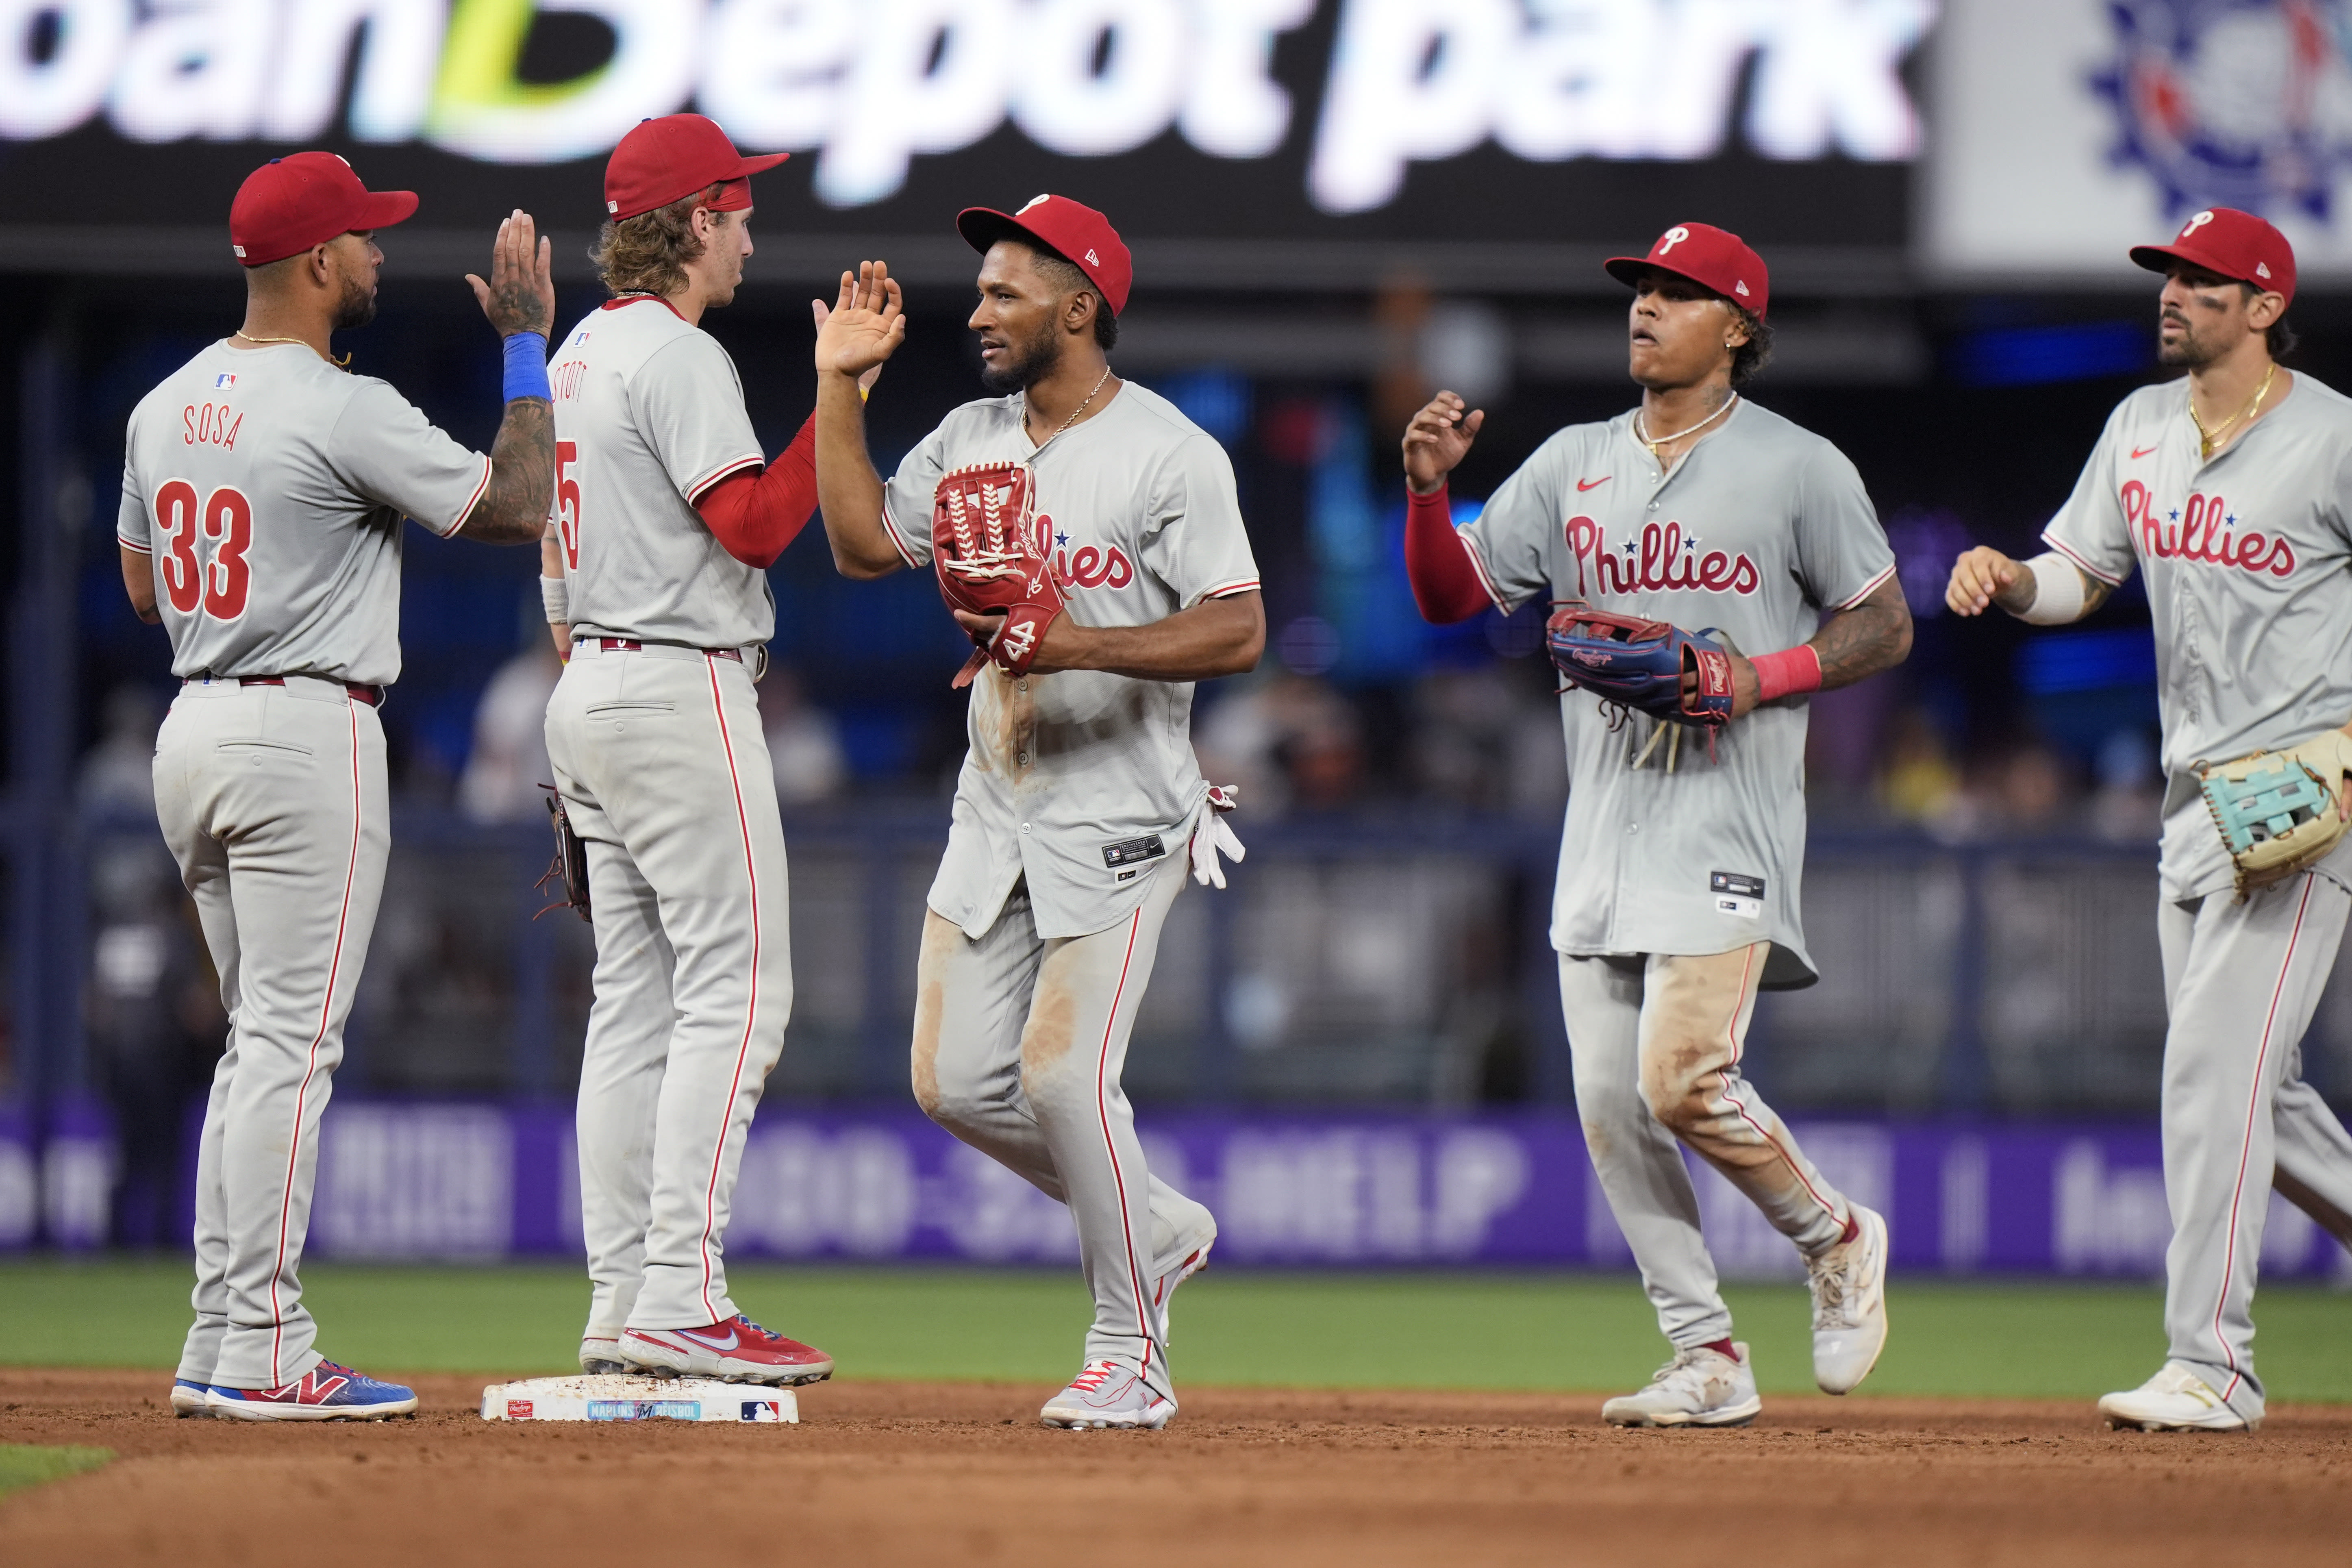 Bryson Stott's bases-clearing triple keys MLB-best Phillies' 8-3 win over Marlins